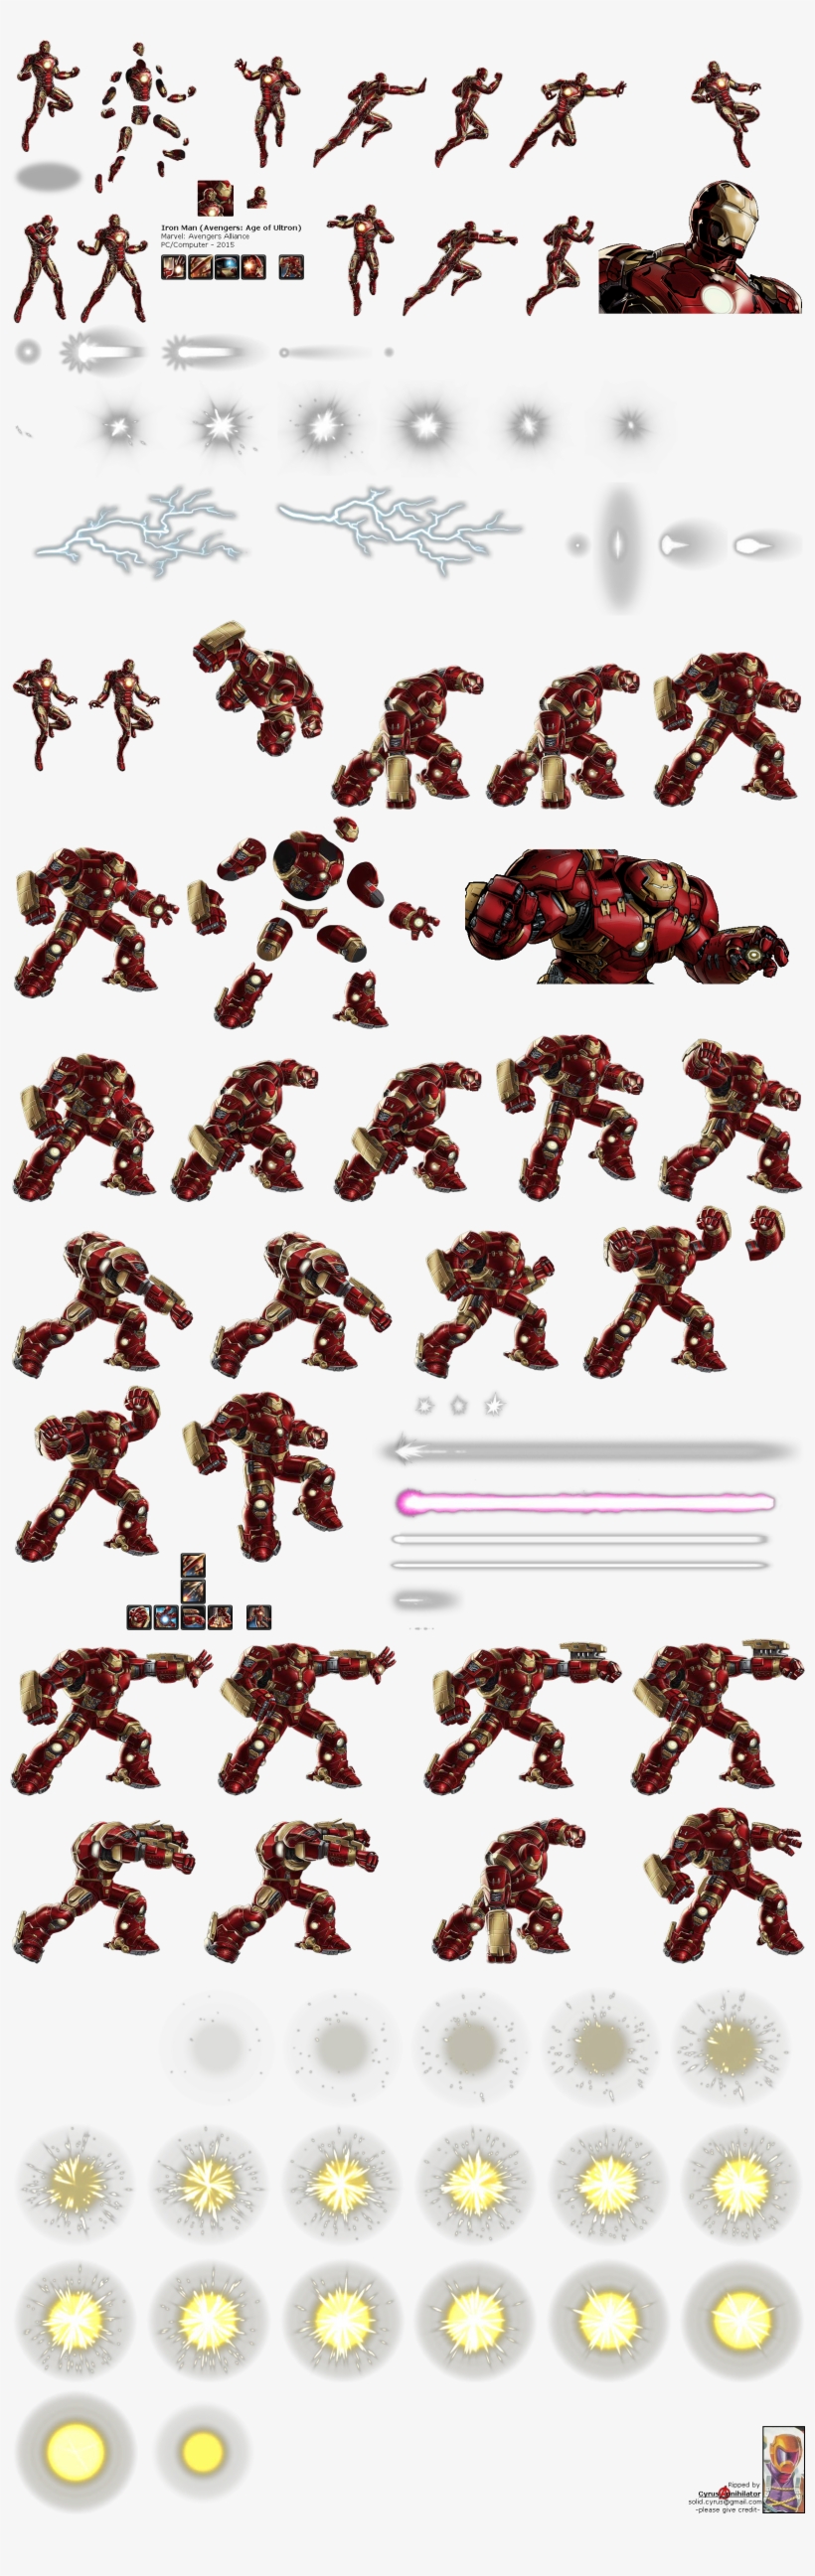 Click To View Full Size - Avengers Alliance Iron Man Png, transparent png #3296464